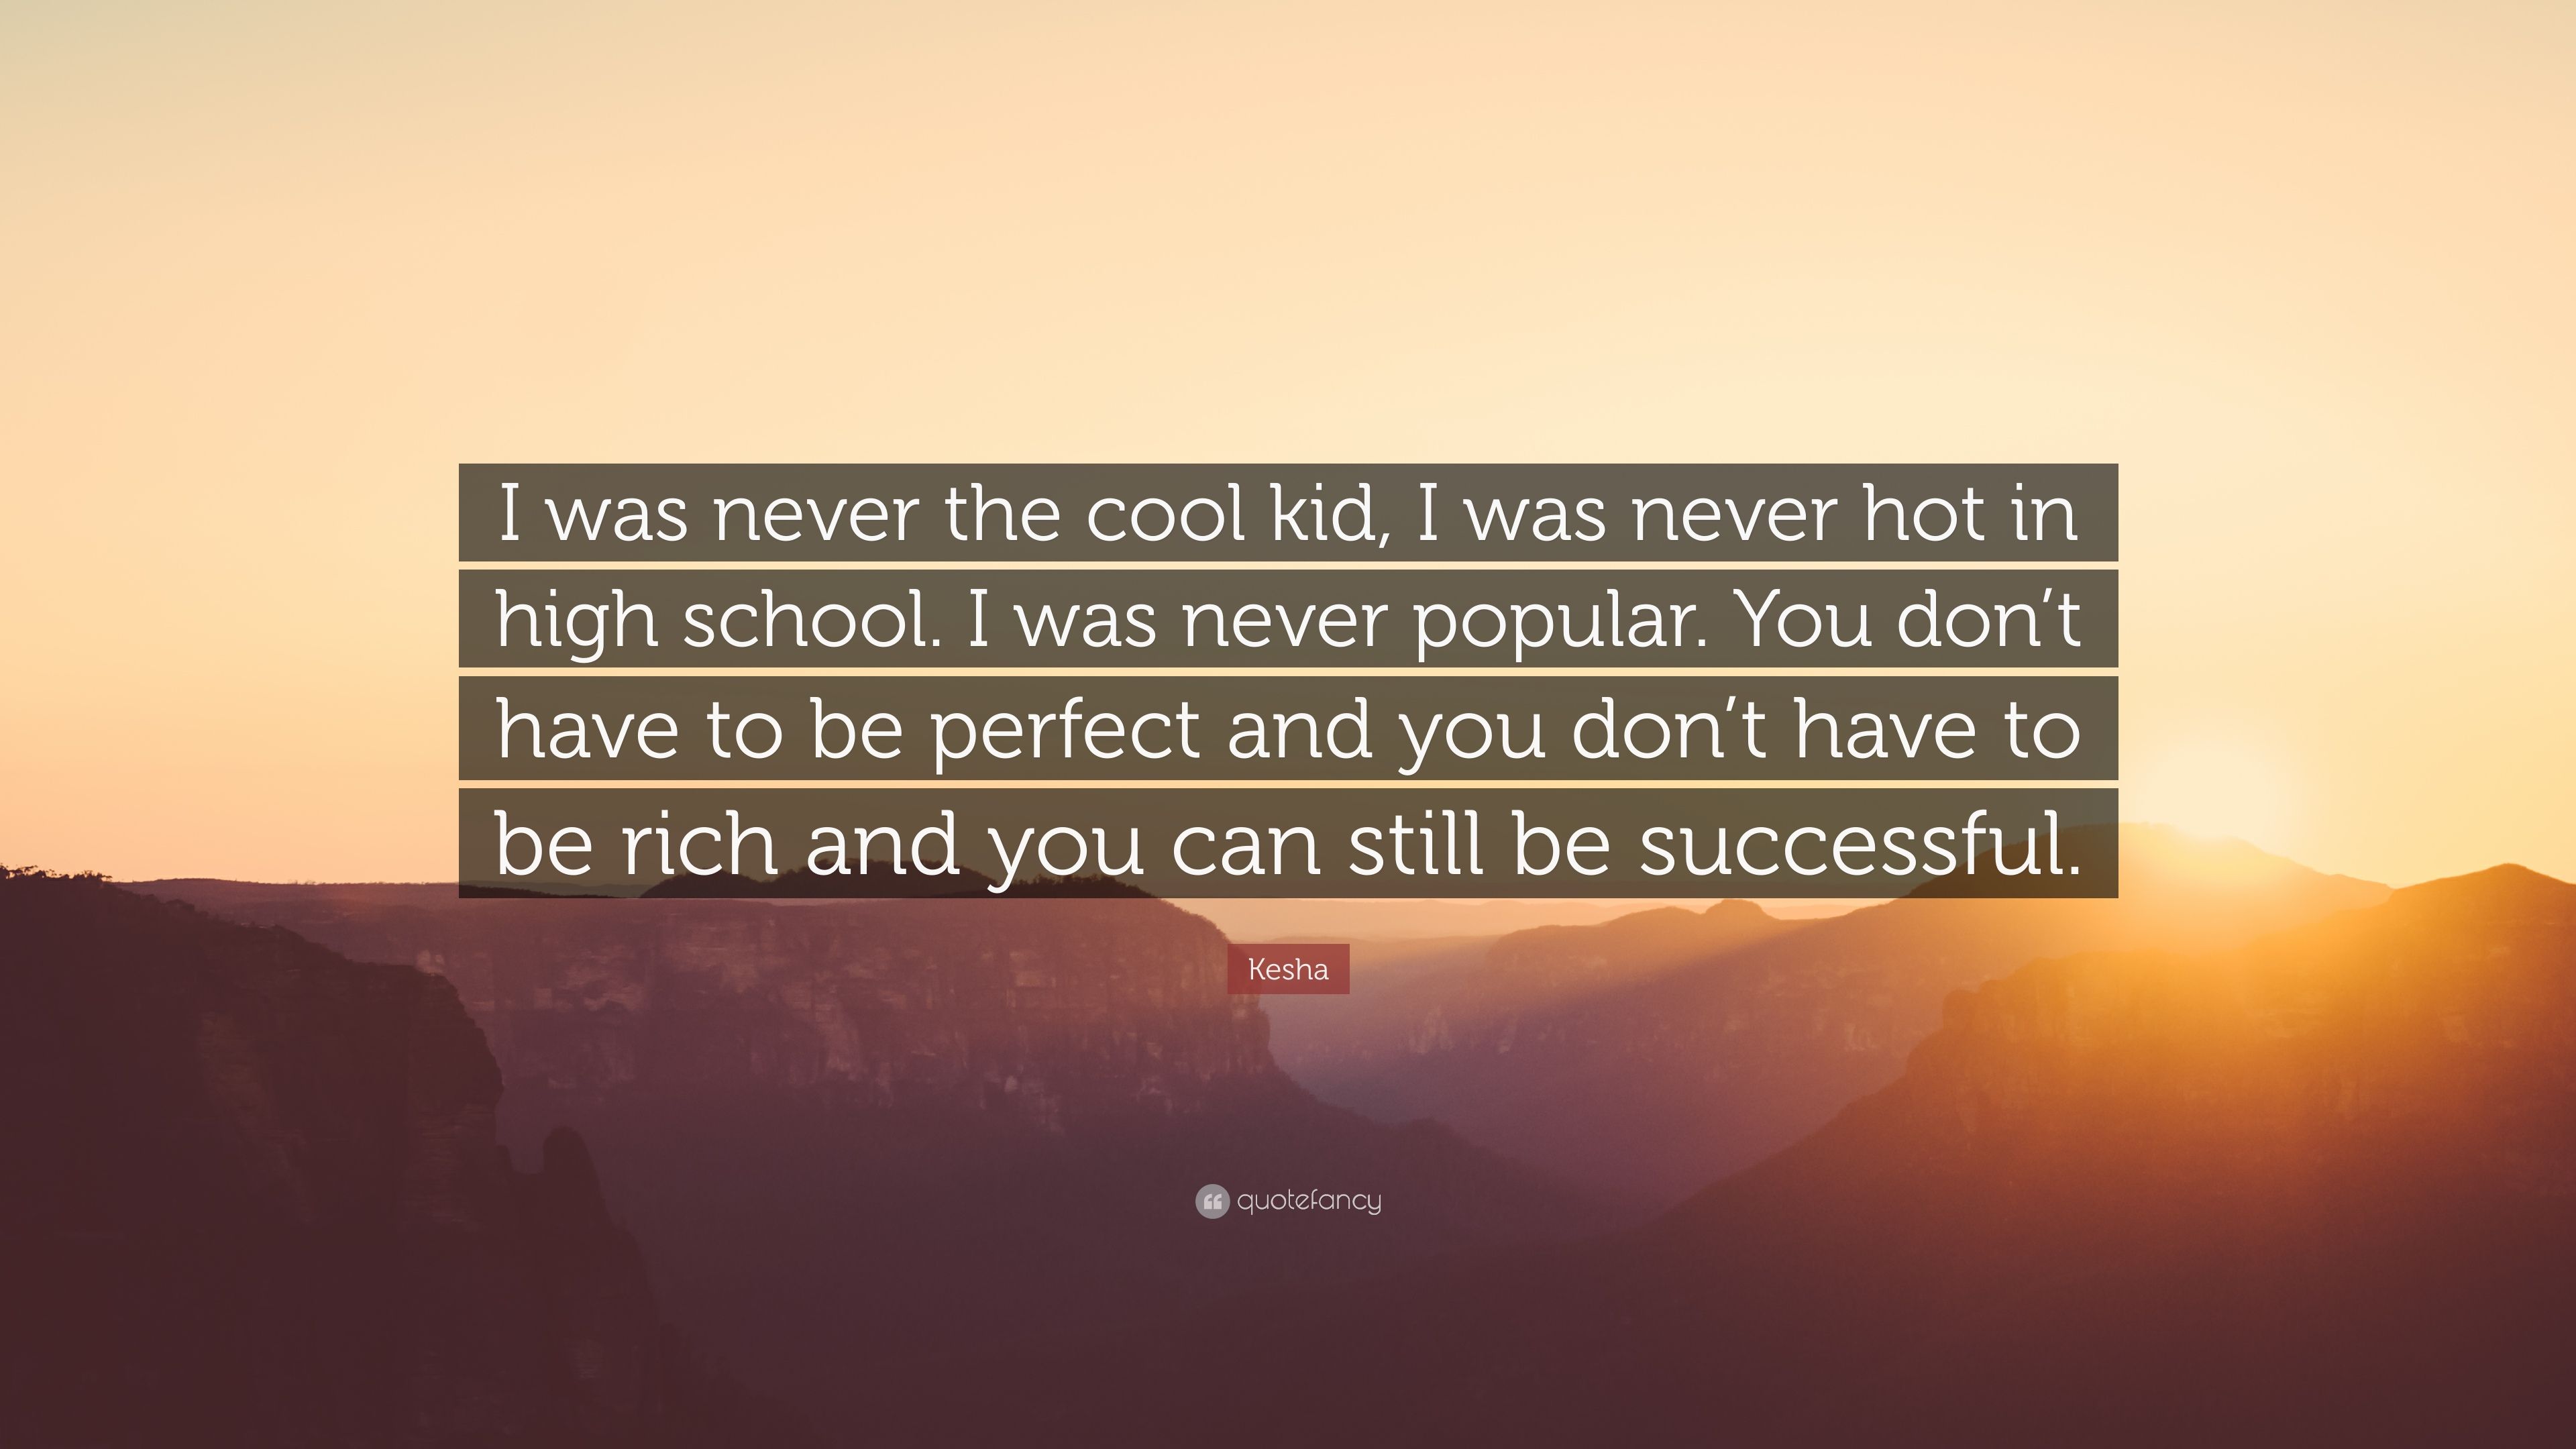 Kesha Quote: “I was never the cool kid, I was never hot in high school. I was never popular. You don't have to be perfect and you don'.” (7 wallpaper)